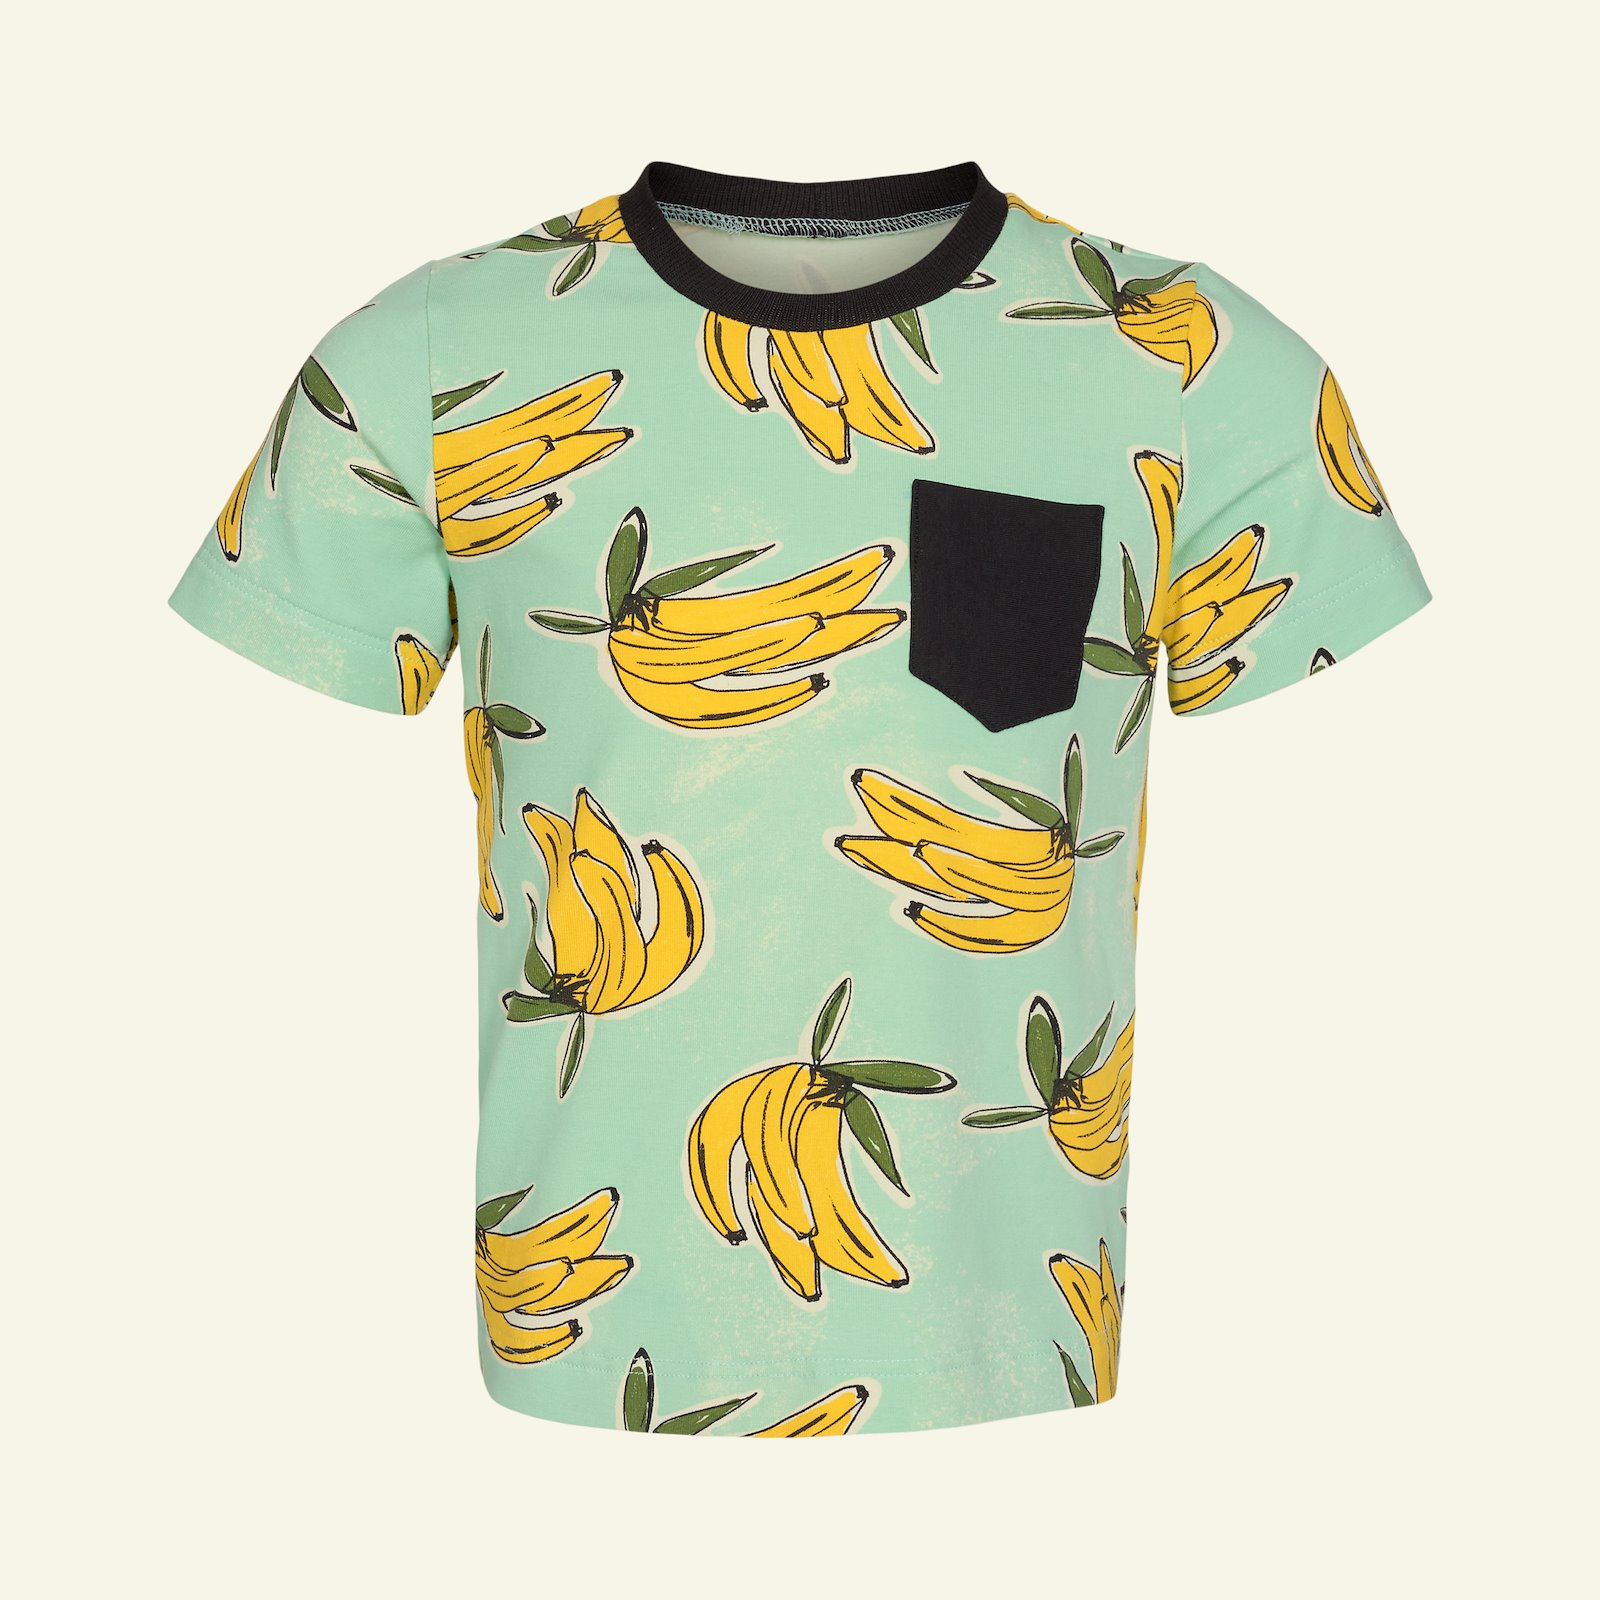 Stretch jersey mint with bananas p62017_272728_sskit